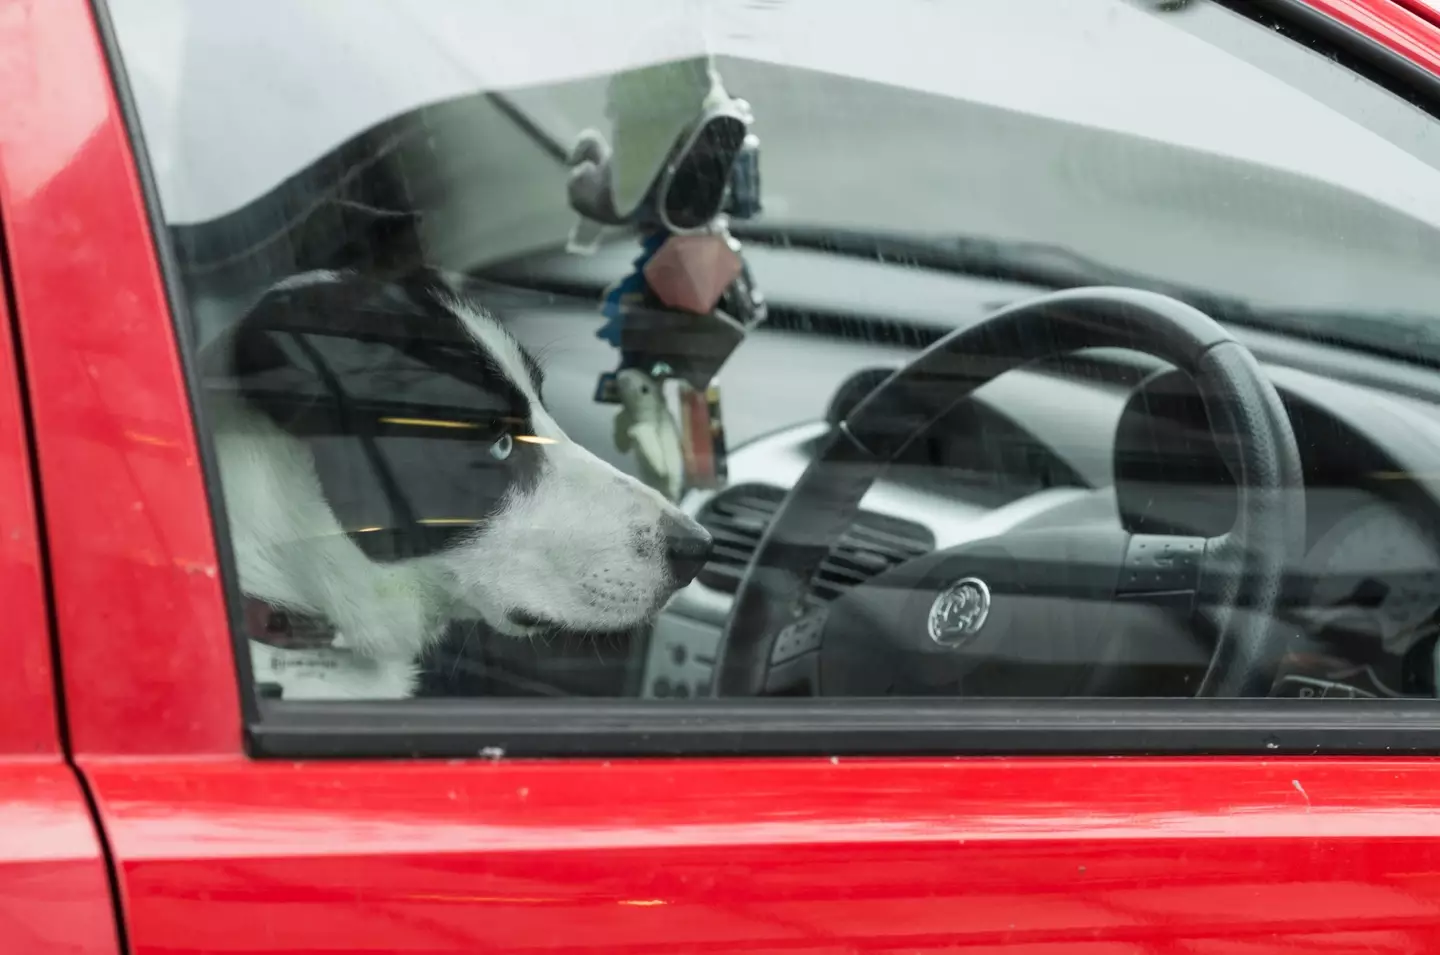 The man tried to swap seats with his dog and claim he wasn't driving.